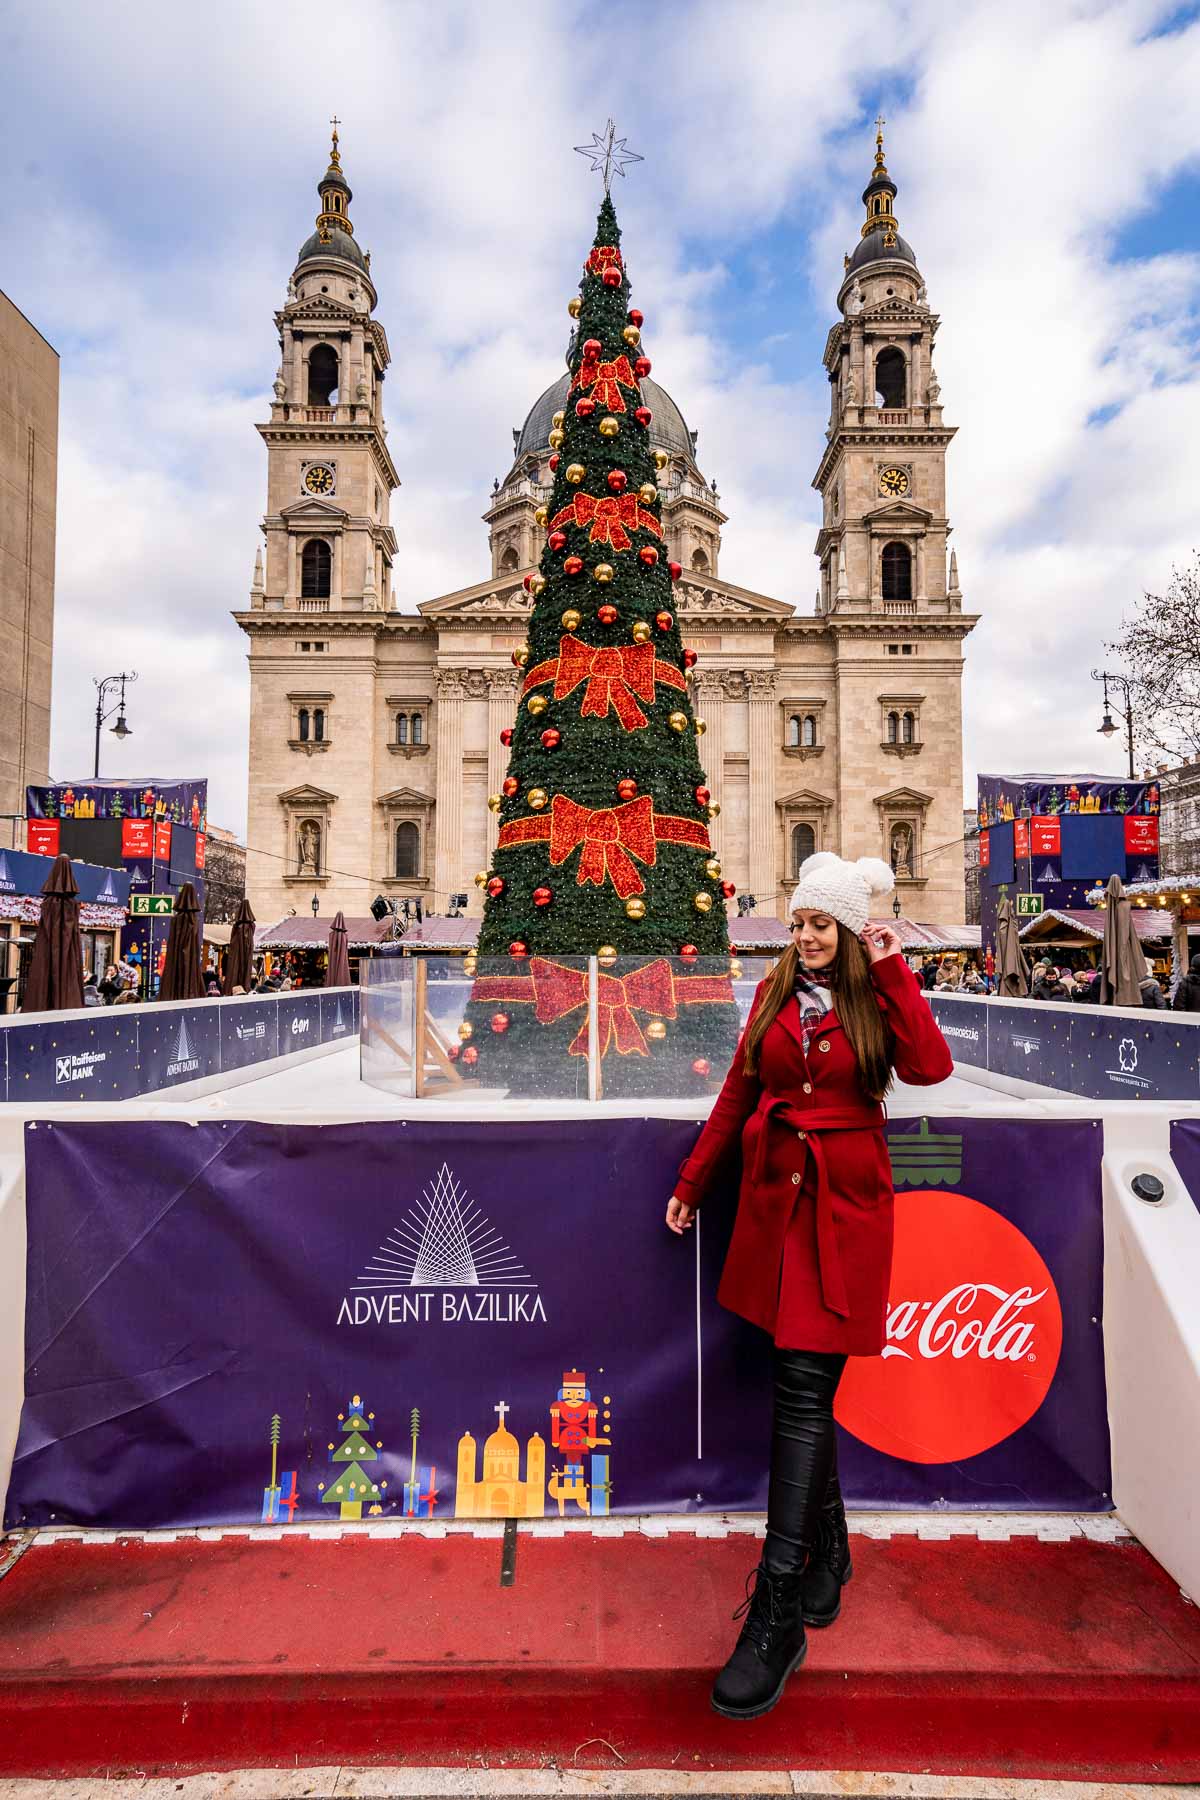 Girl in red coat in front of the Christmas tree at St. Stephen's Basilica, Budapest